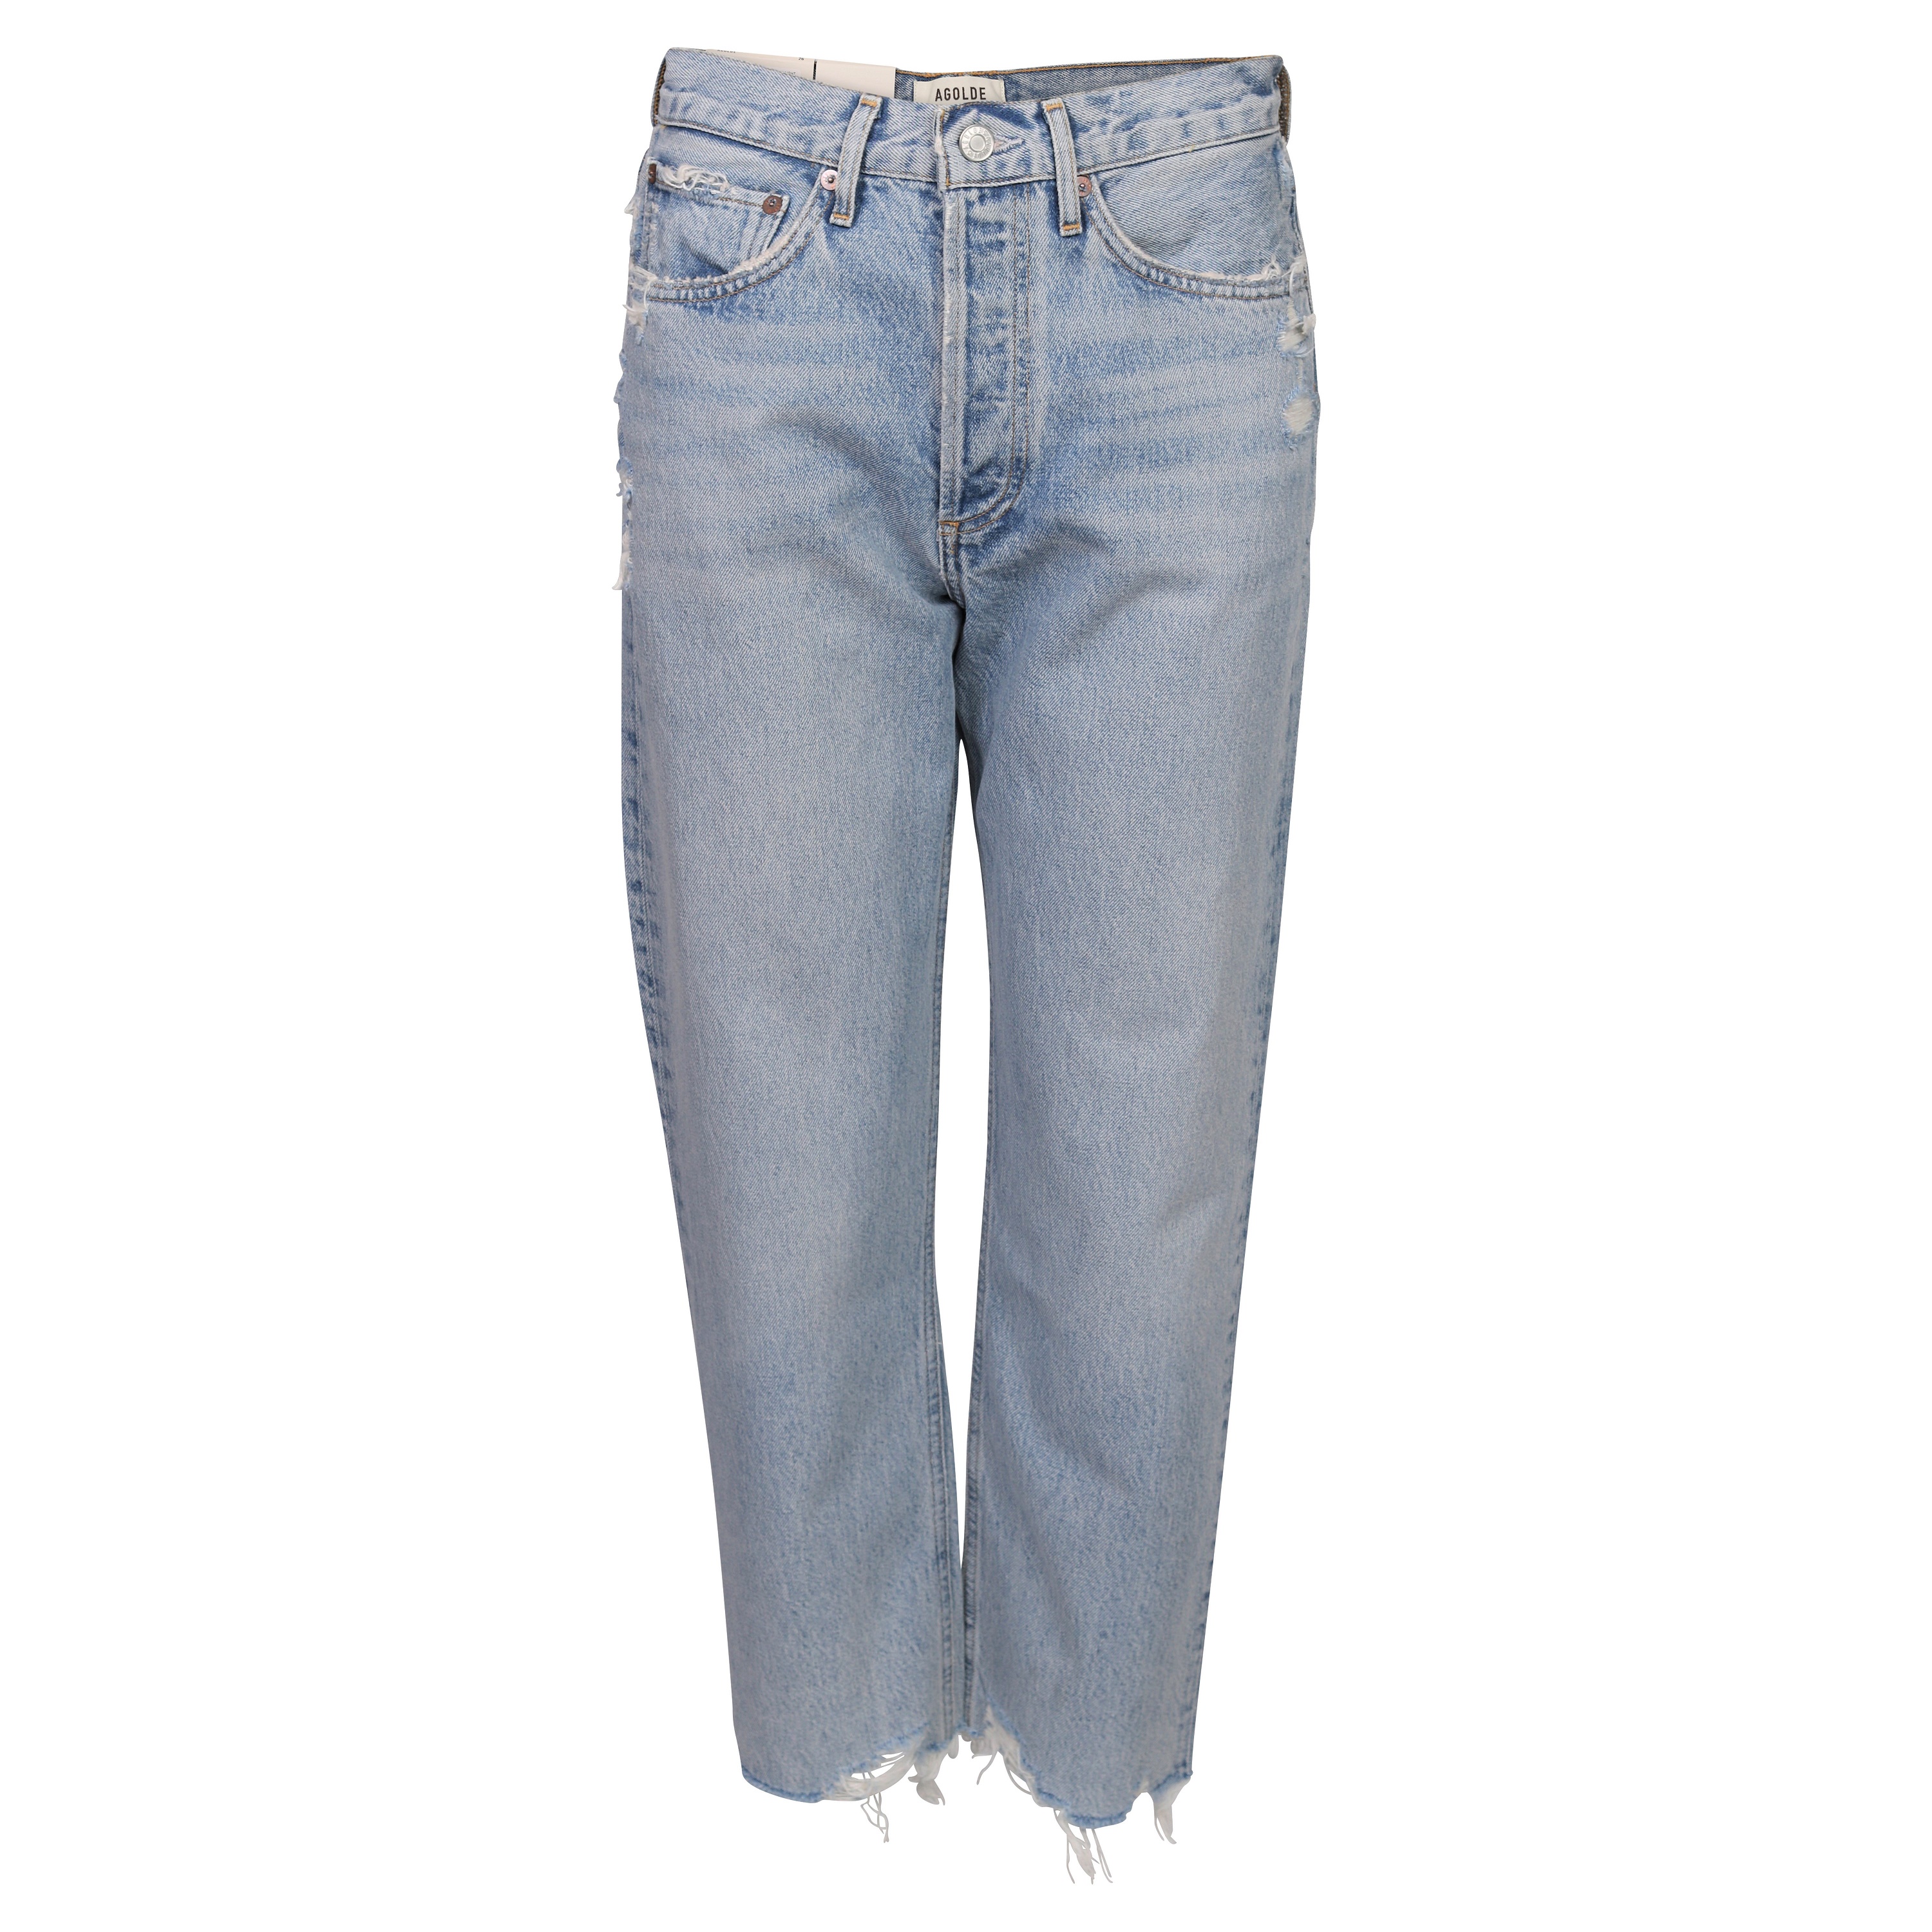 Agolde Jeans 90s Cropped in Nerve Washing W 24